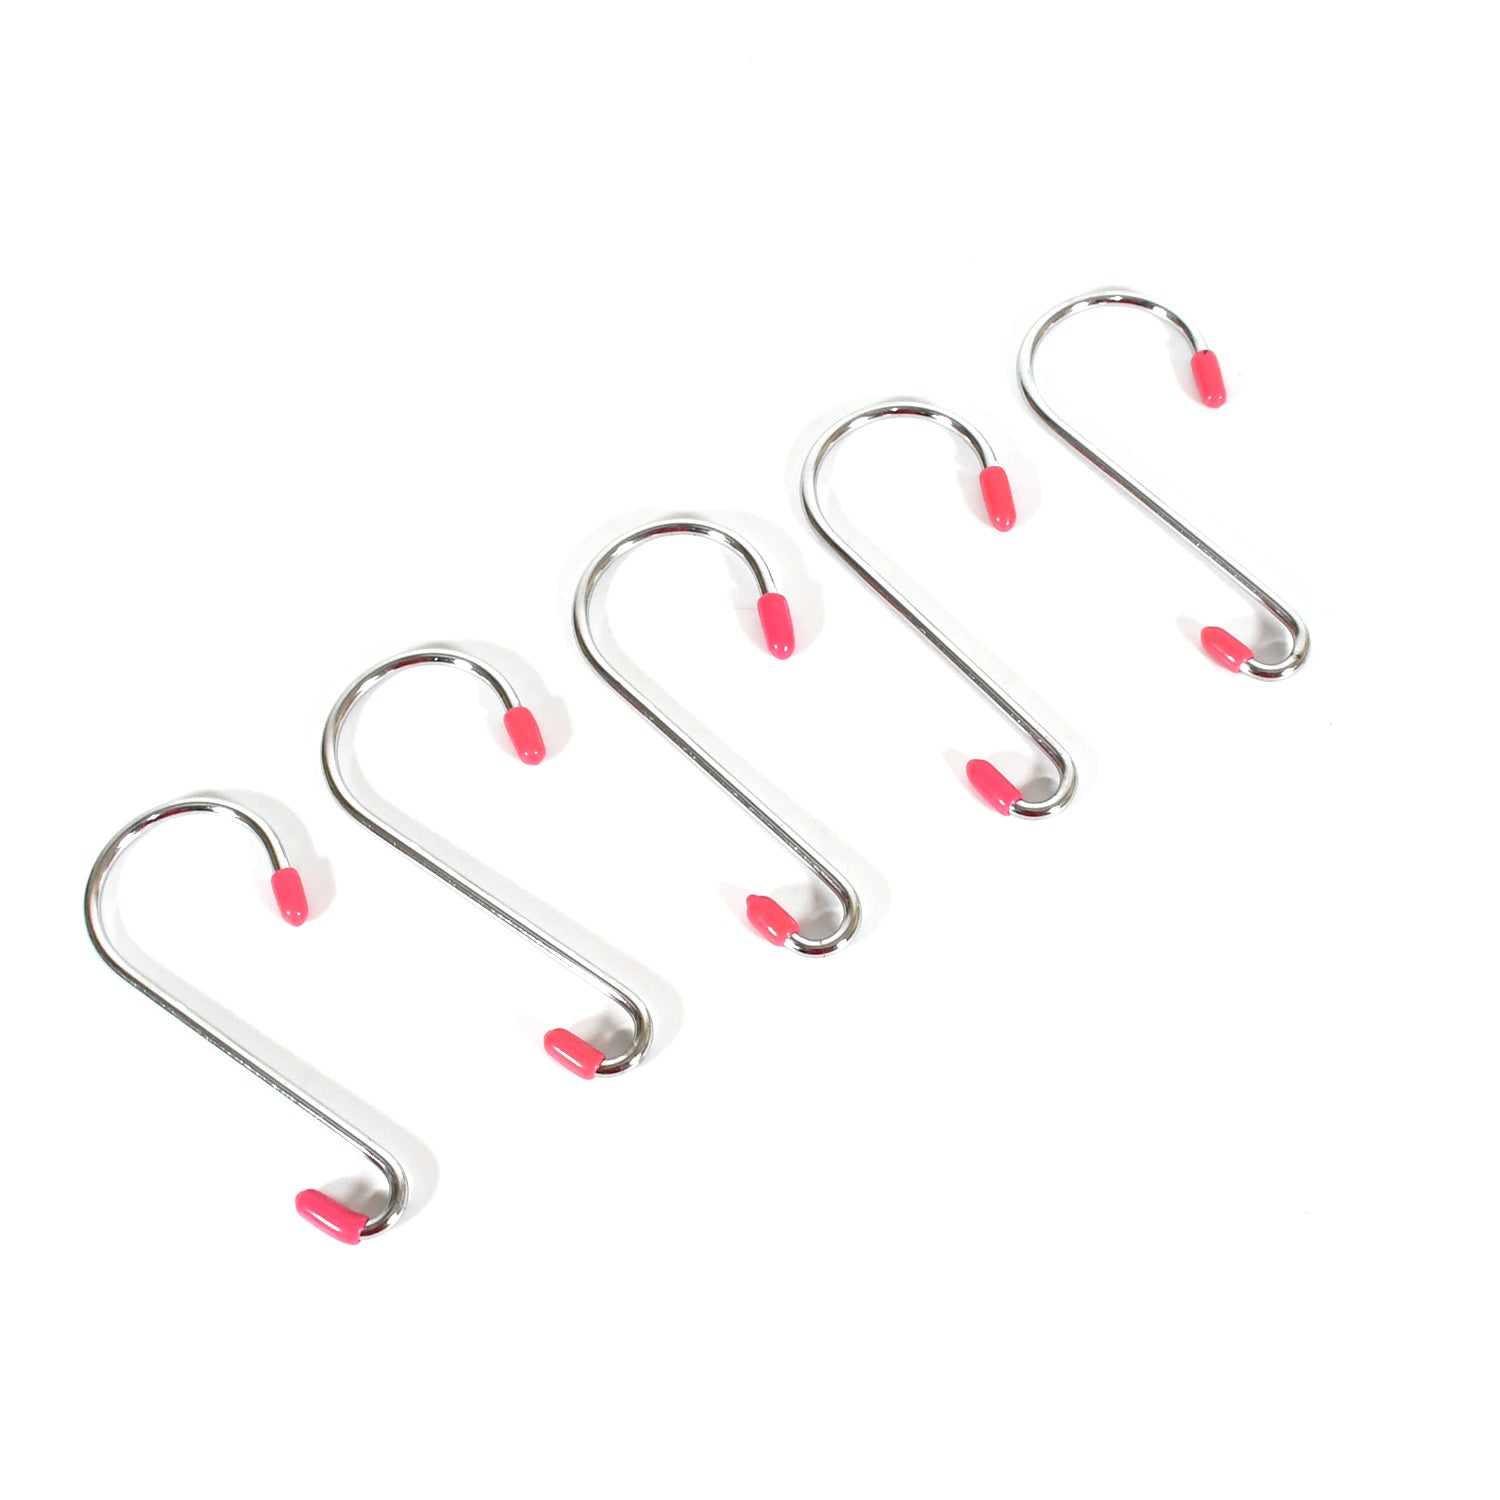 17538 Stainless Steel S-Shaped Hook, Flat Hook, S-Shaped Hook Behind The KitcheDoor , Metal Hook Clothes Hook Kitchenware (5 Pc Set)